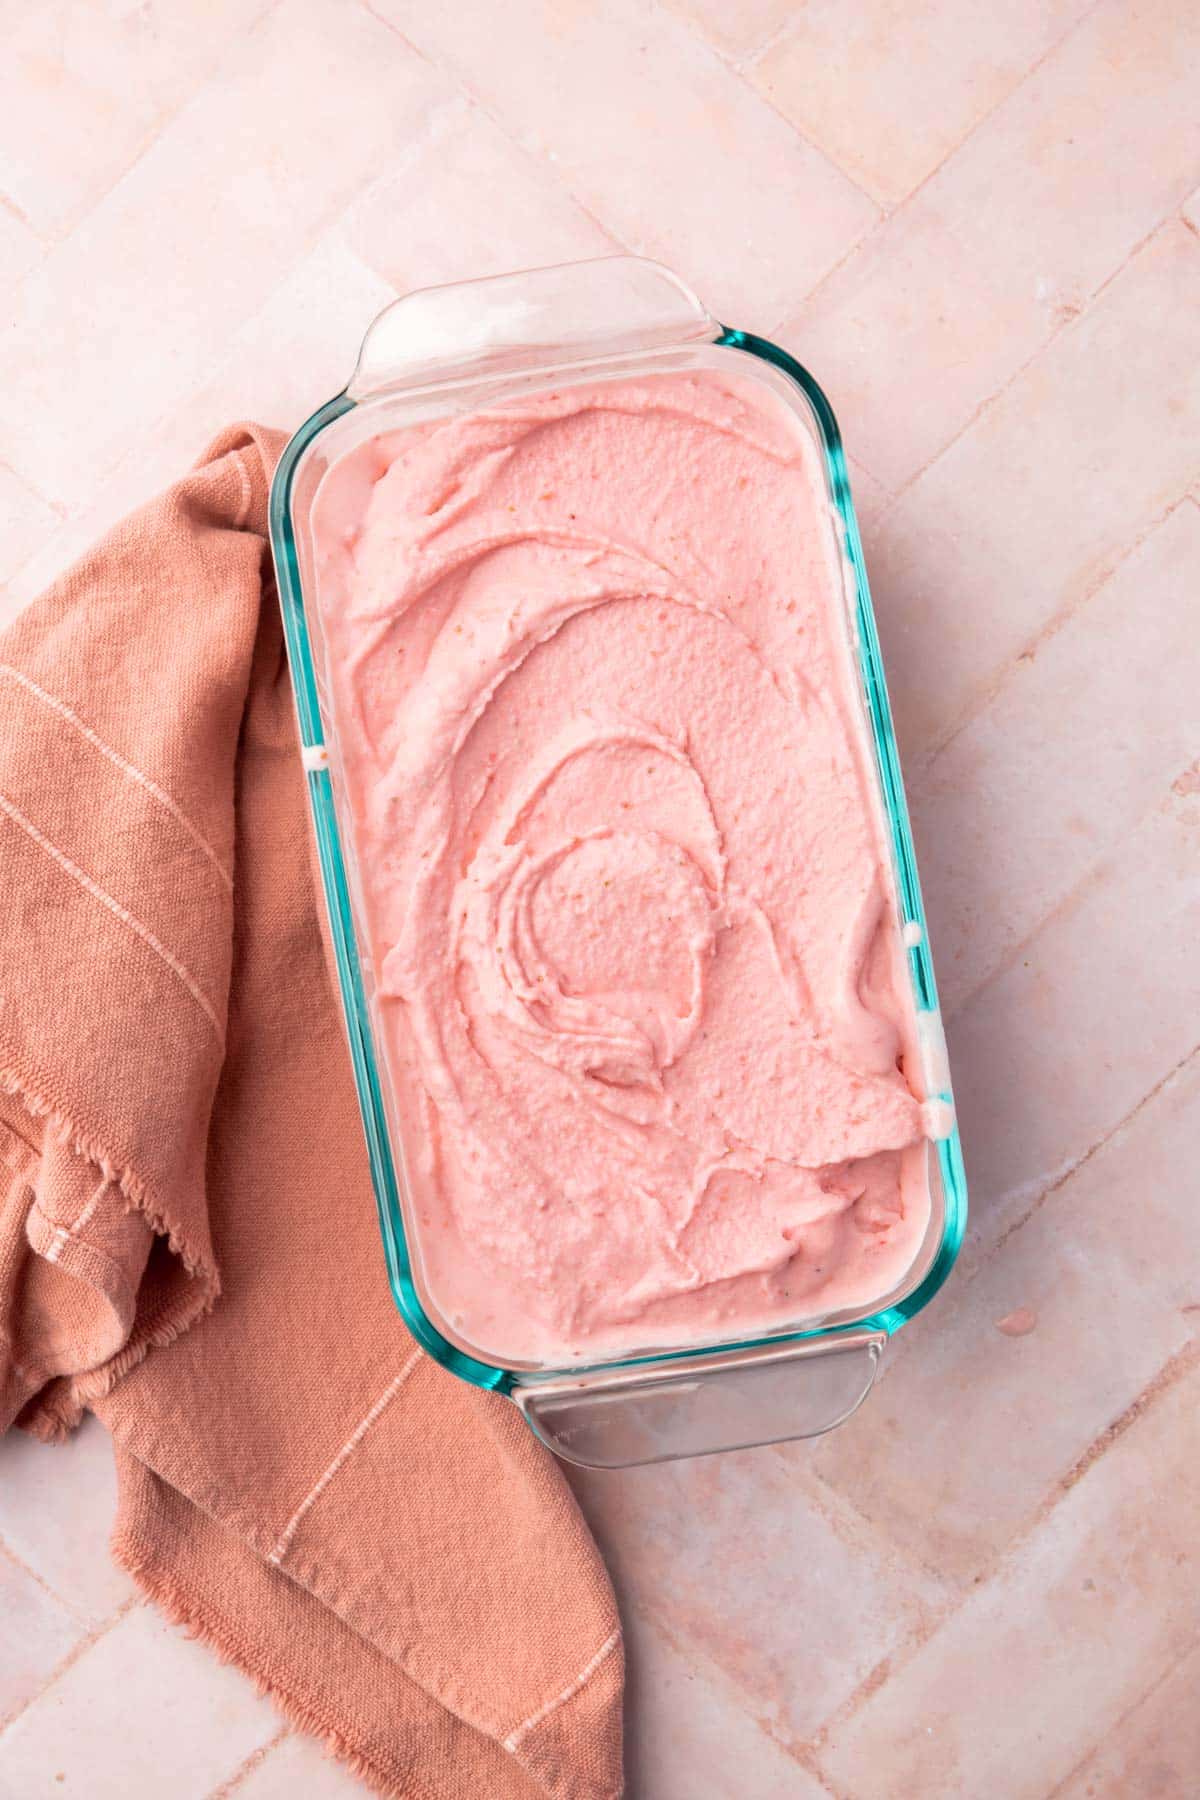 A glass loaf pan filled with strawberry ice cream on a pink herringbone table.